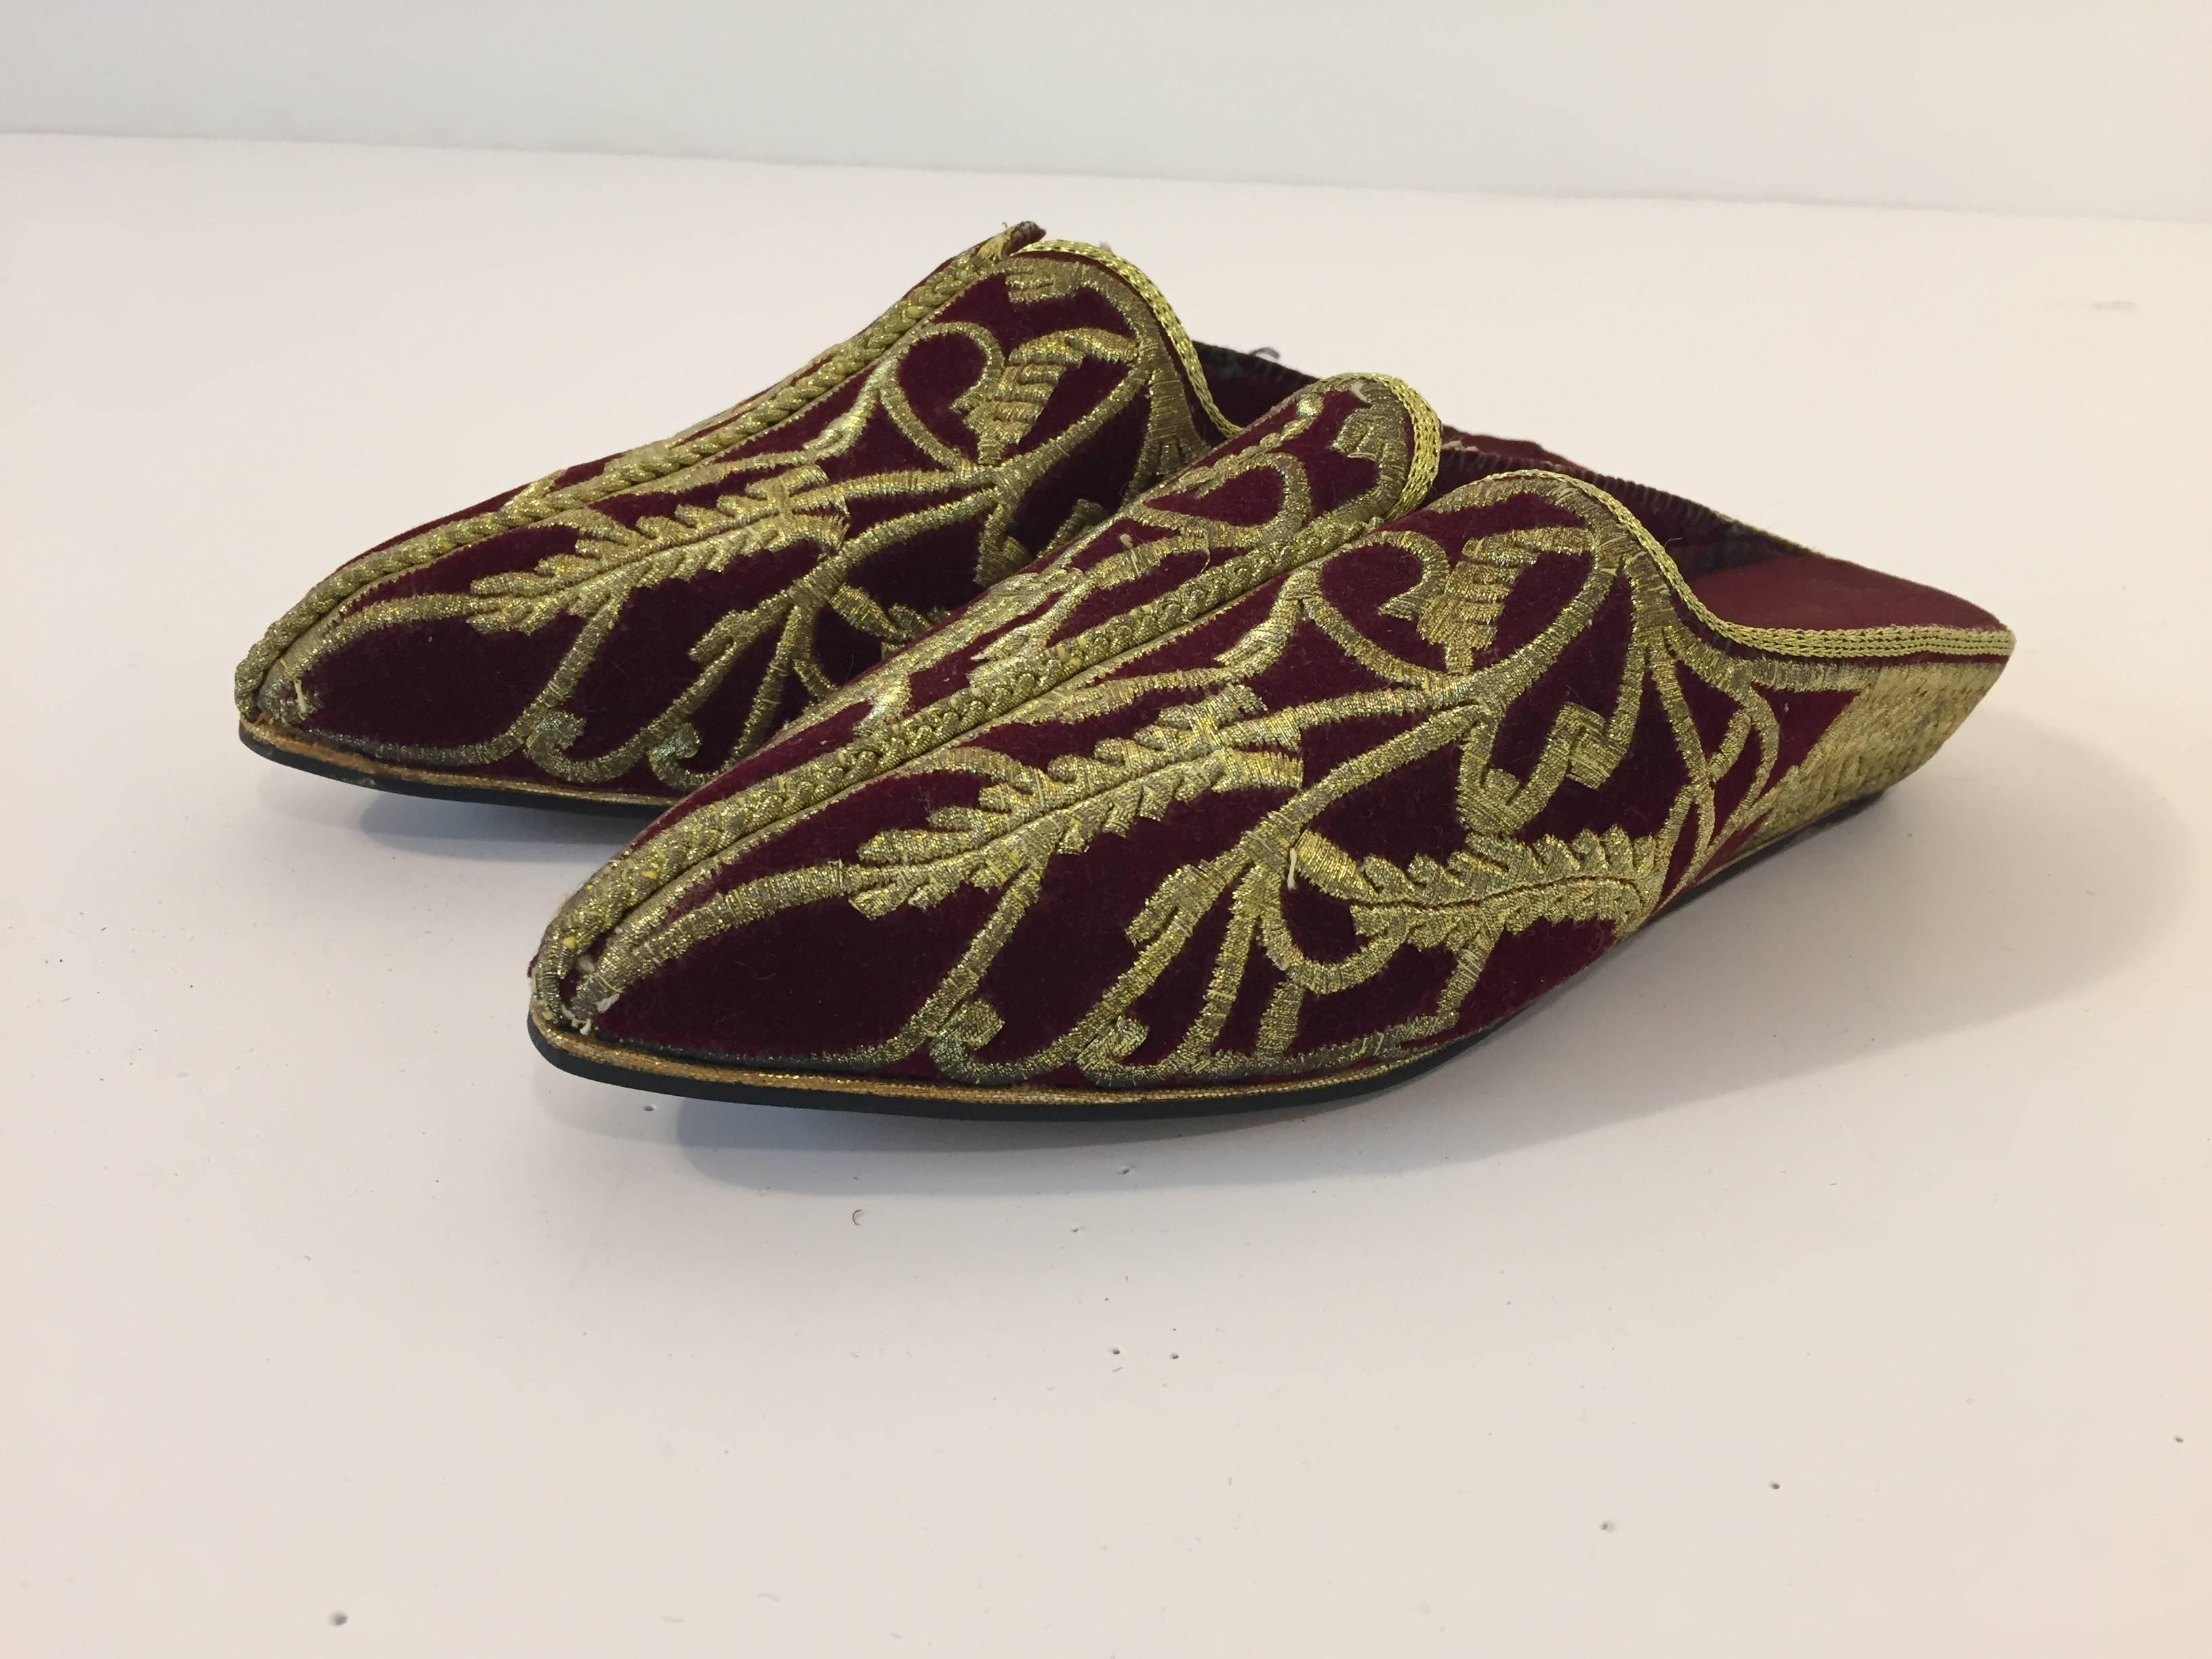 Vintage velvet burgundy embroidered pointed toe Moroccan Moorish exotic shoes.
Embroidered Moorish Mughal metallic gold thread ethnic flat slippers.
Late-Ottoman Turkish Moorish style velvet shoes decorated with traditional embroidery gold